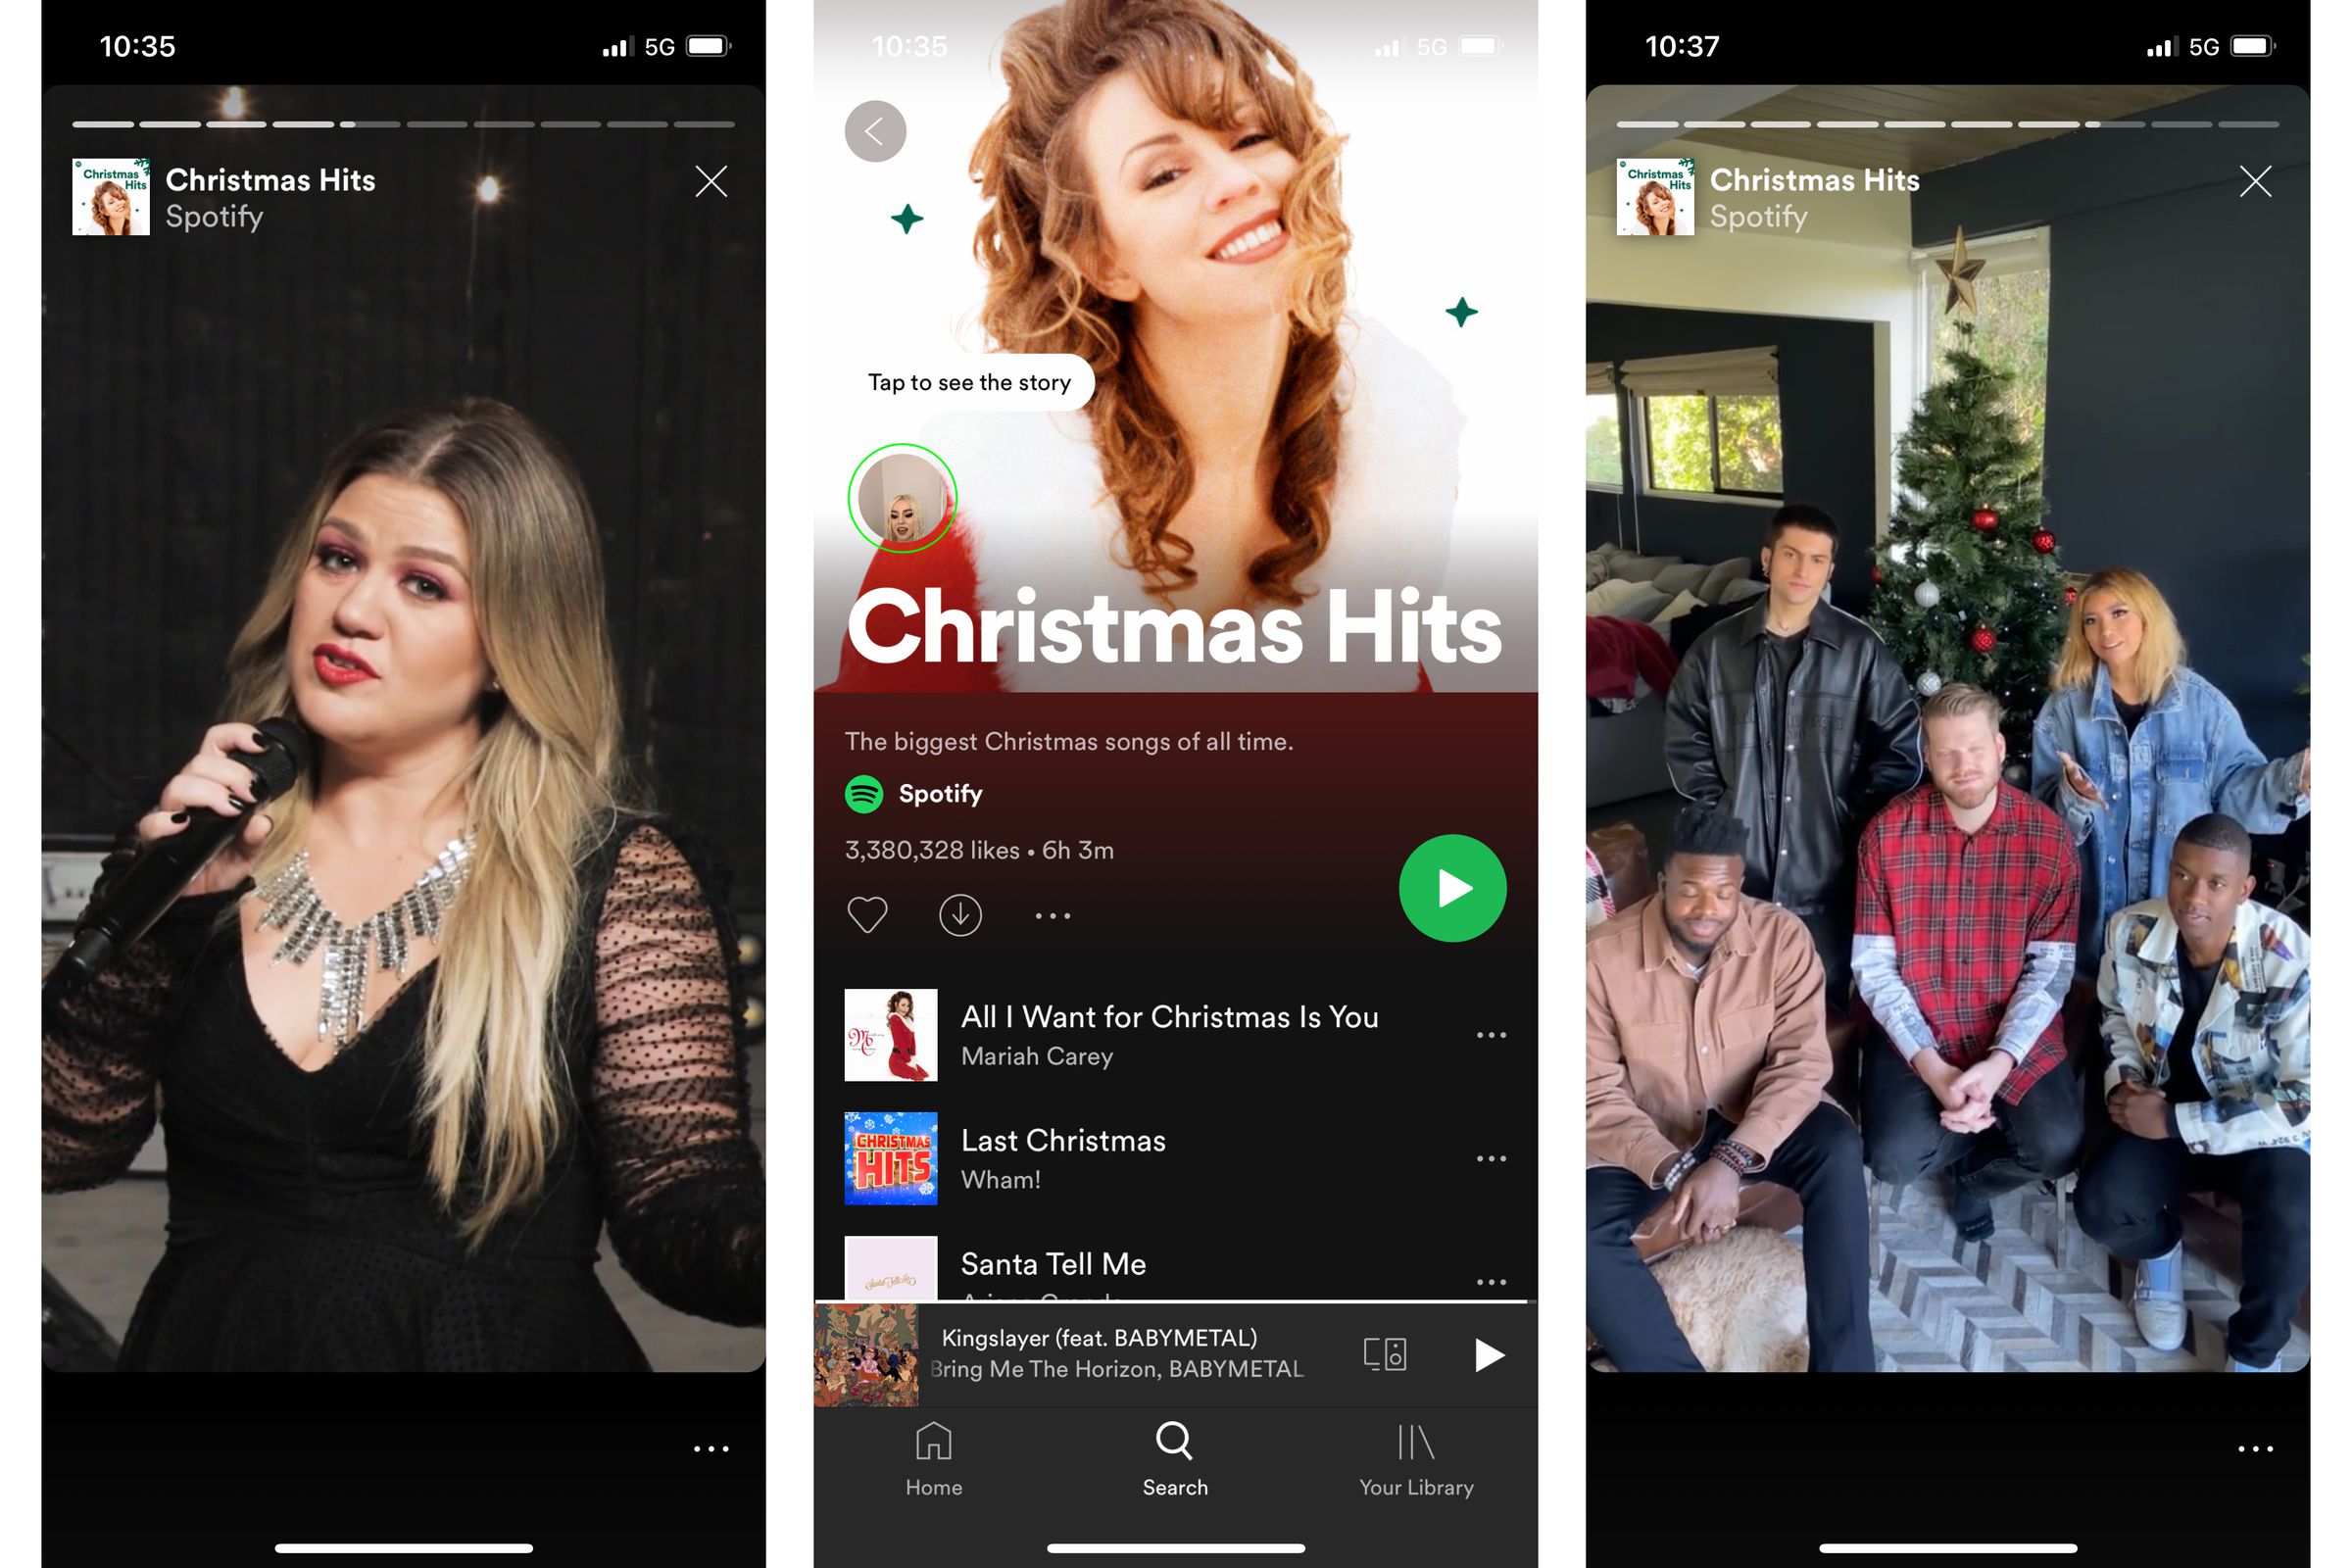 Spotify’s Christmas Hits playlists was one of the ones to get an accompanying story.